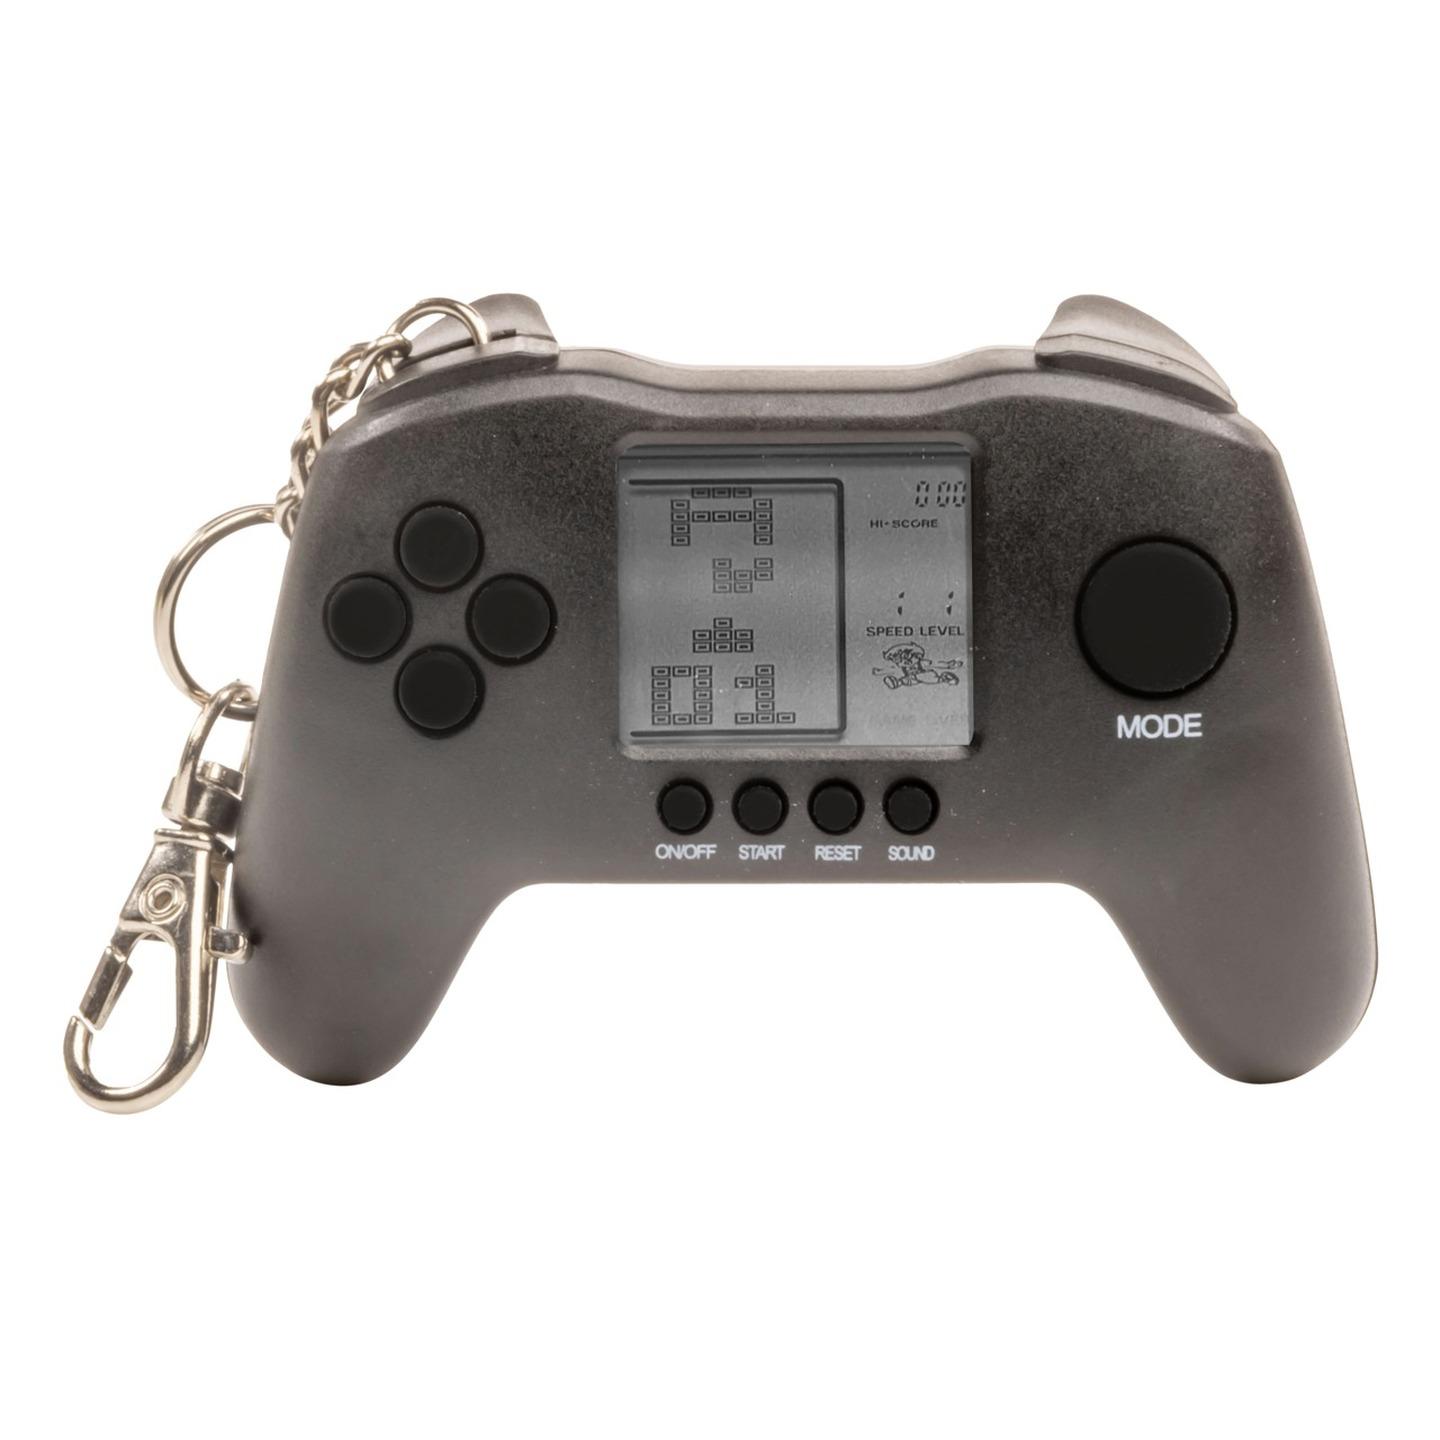 Mini Handheld Gaming Console with 26 Games